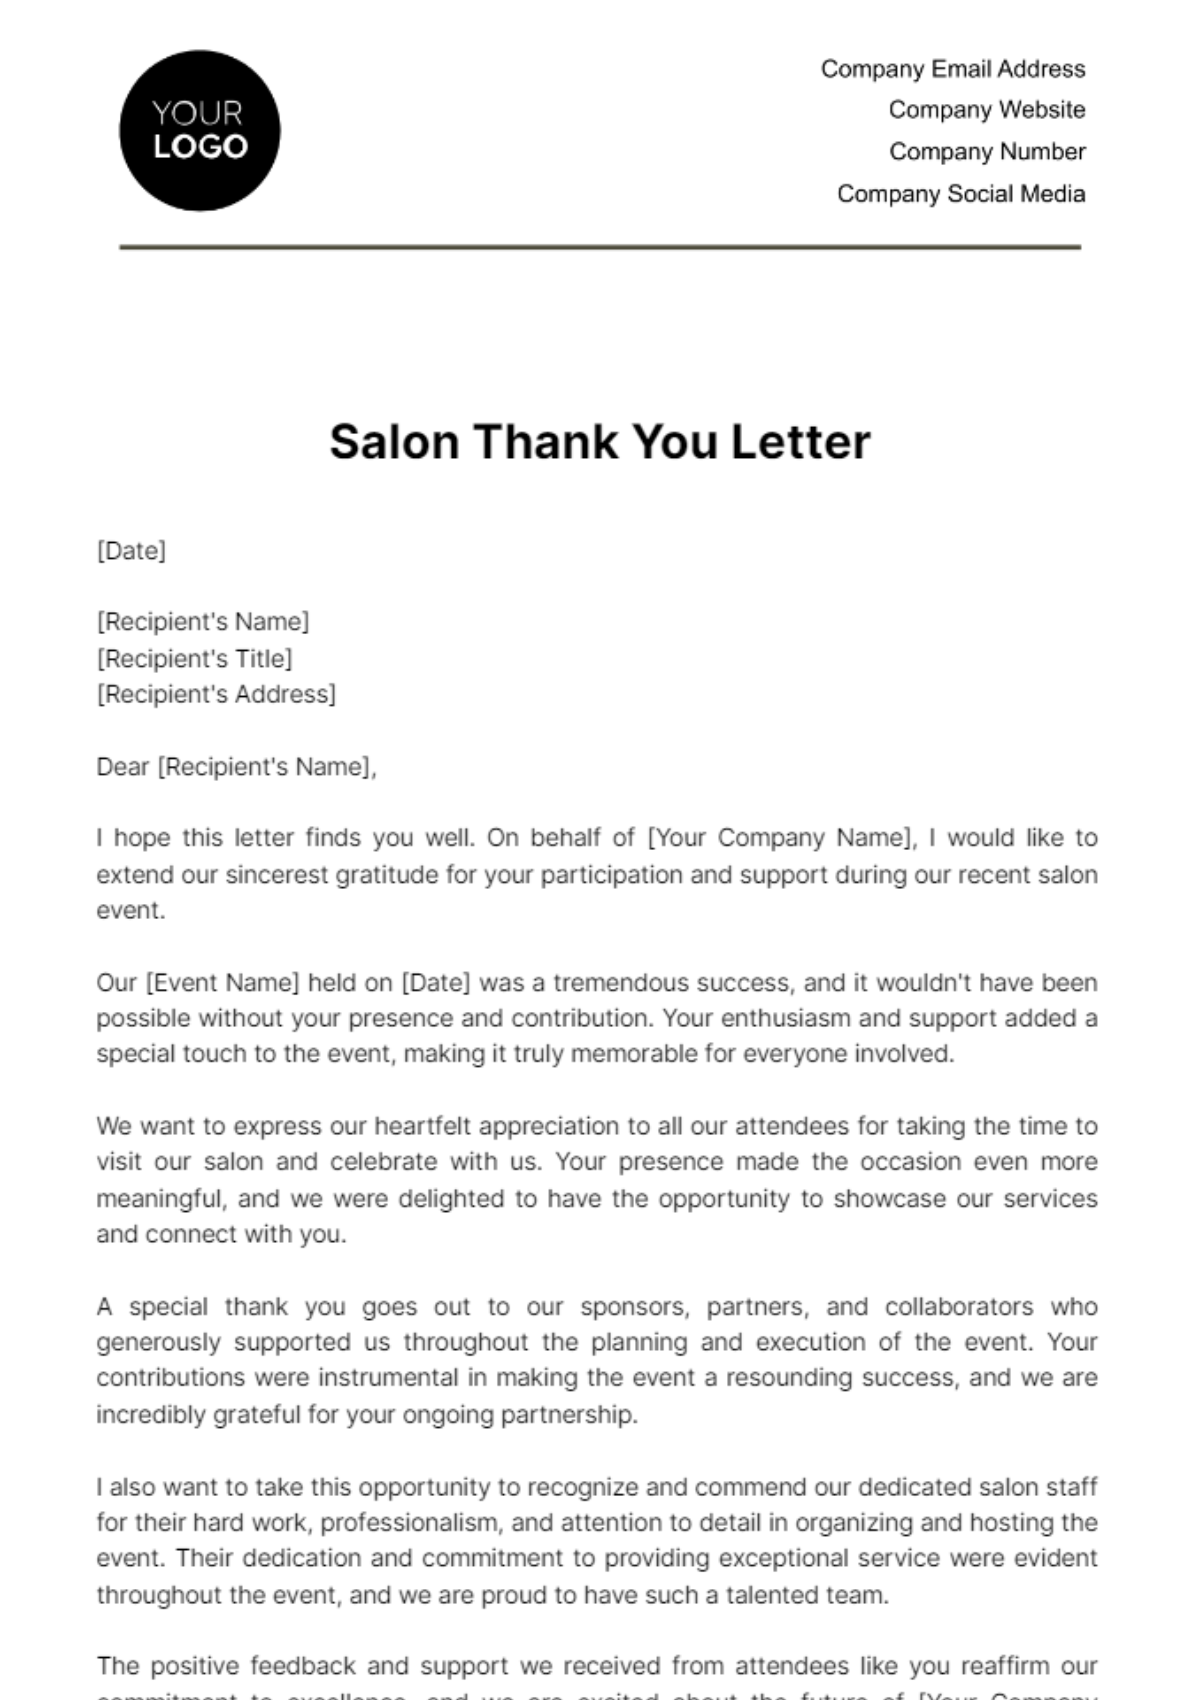 Salon Thank You Letter Template